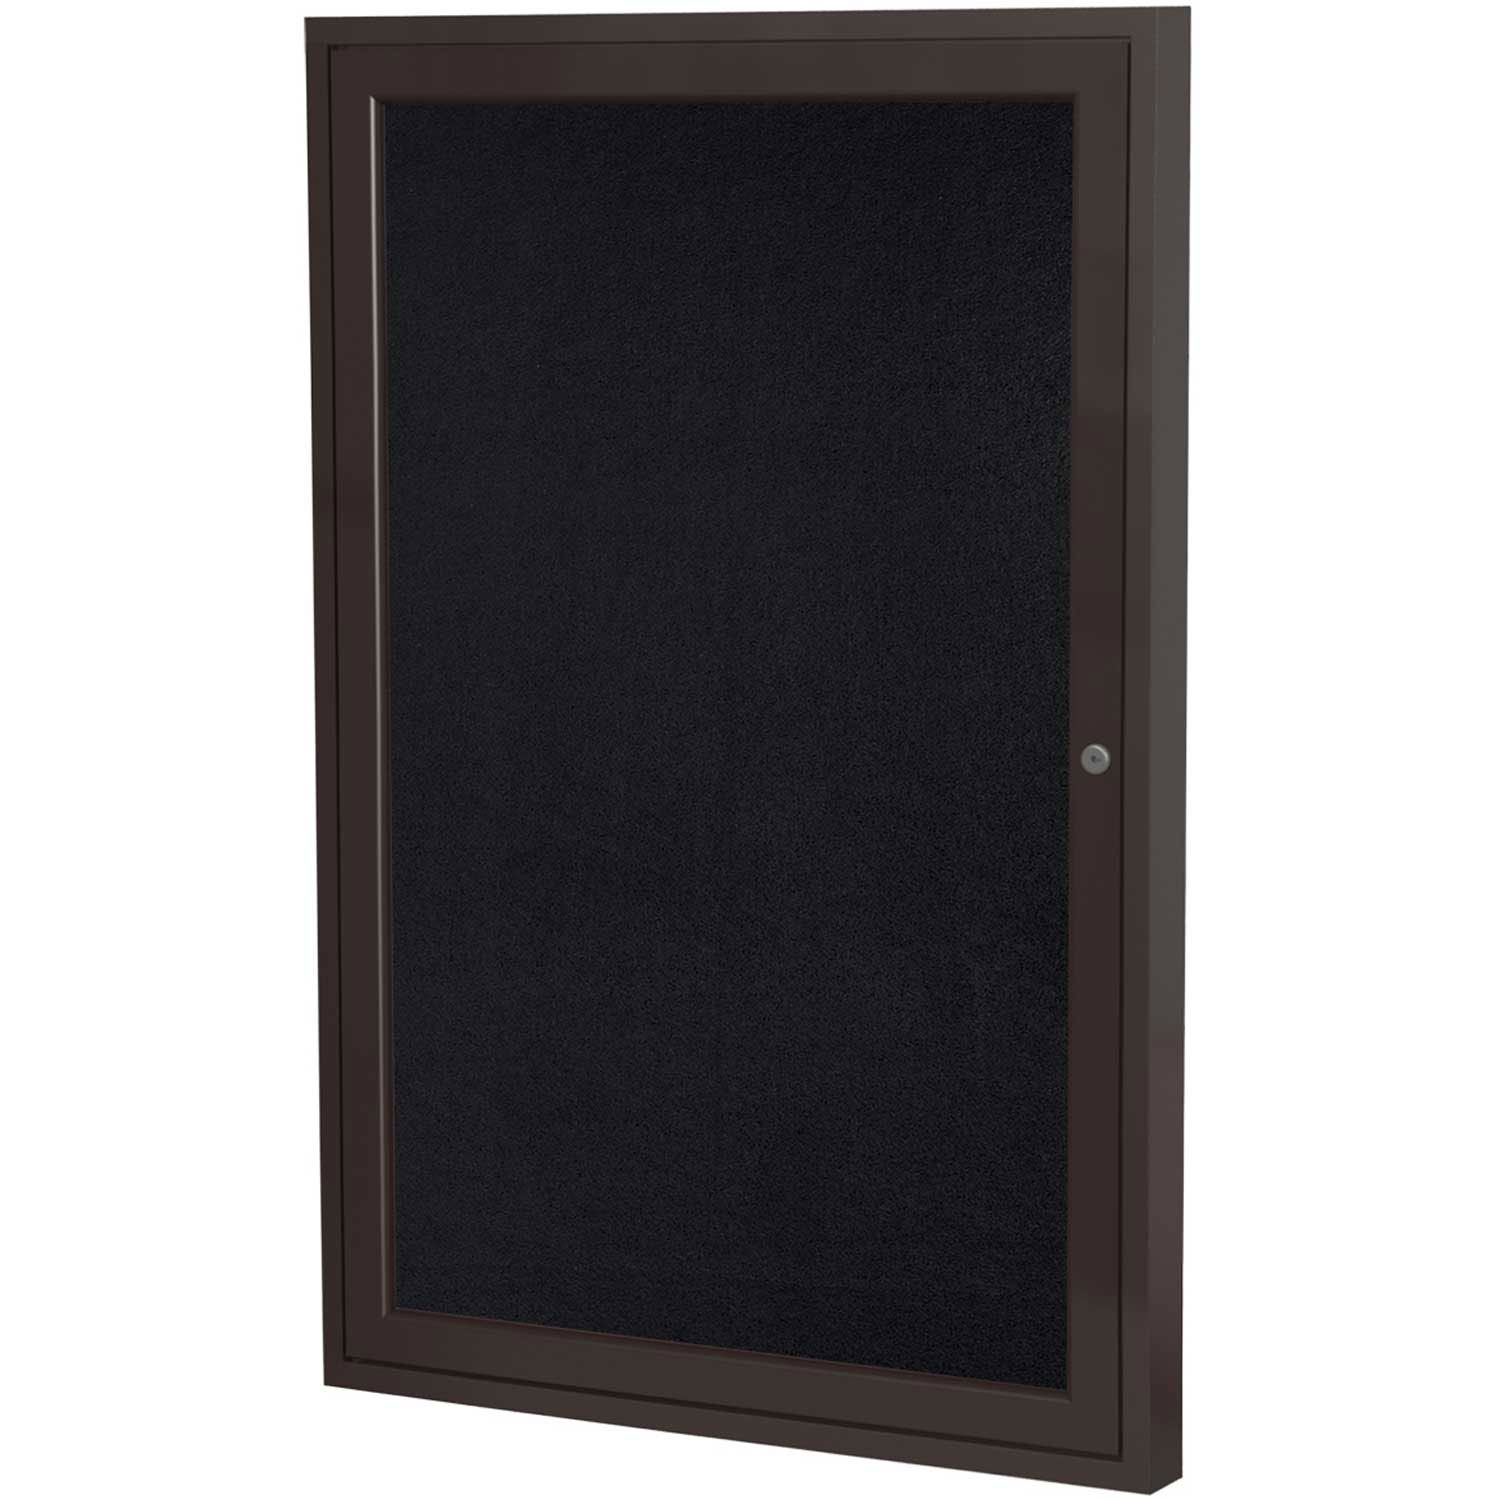 Ghent® 1 Door Enclosed Recycled Rubber Bulletin Board, 18